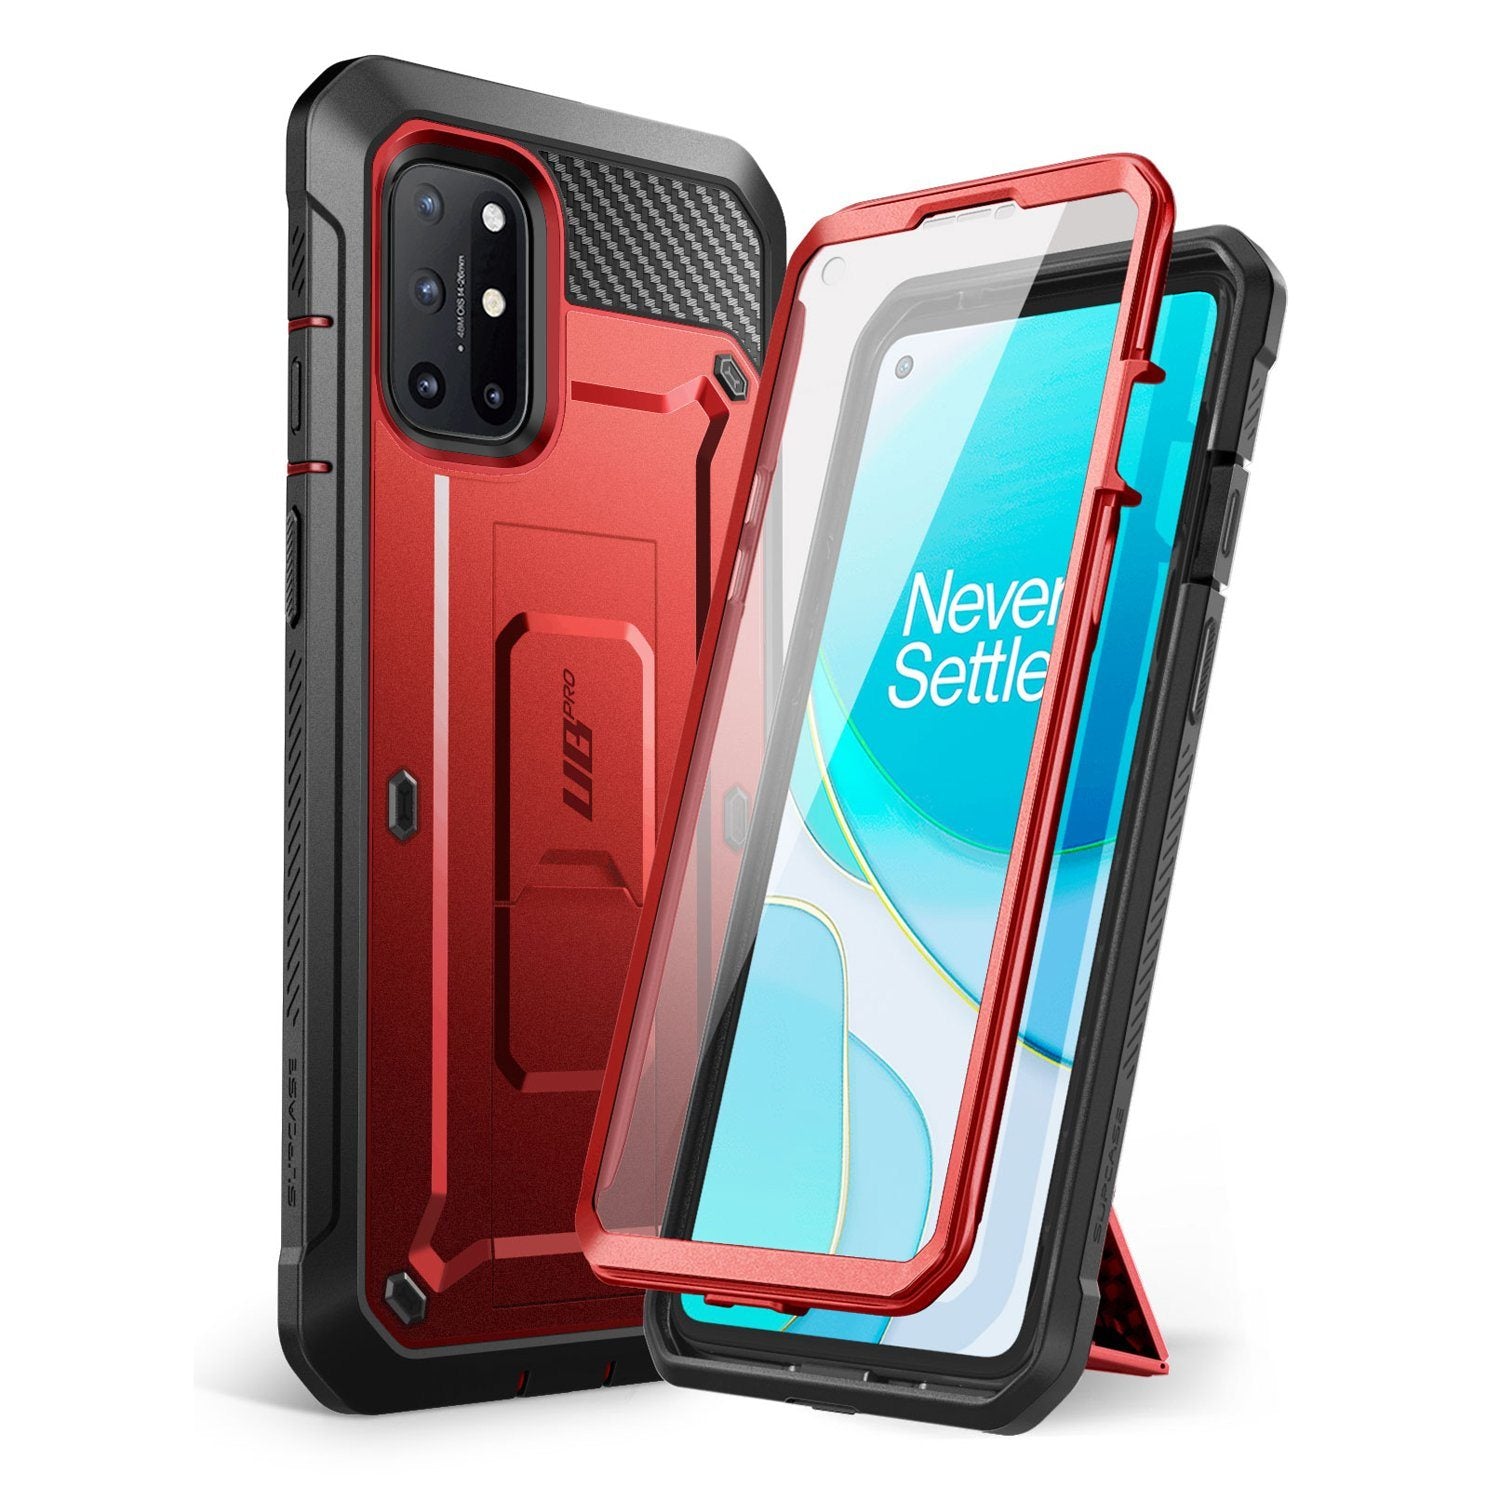 Supcase Unicorn Beetle Pro Series Full-Body Rugged Holster Case for Oneplus 8T (With Built-in Screen Protector)